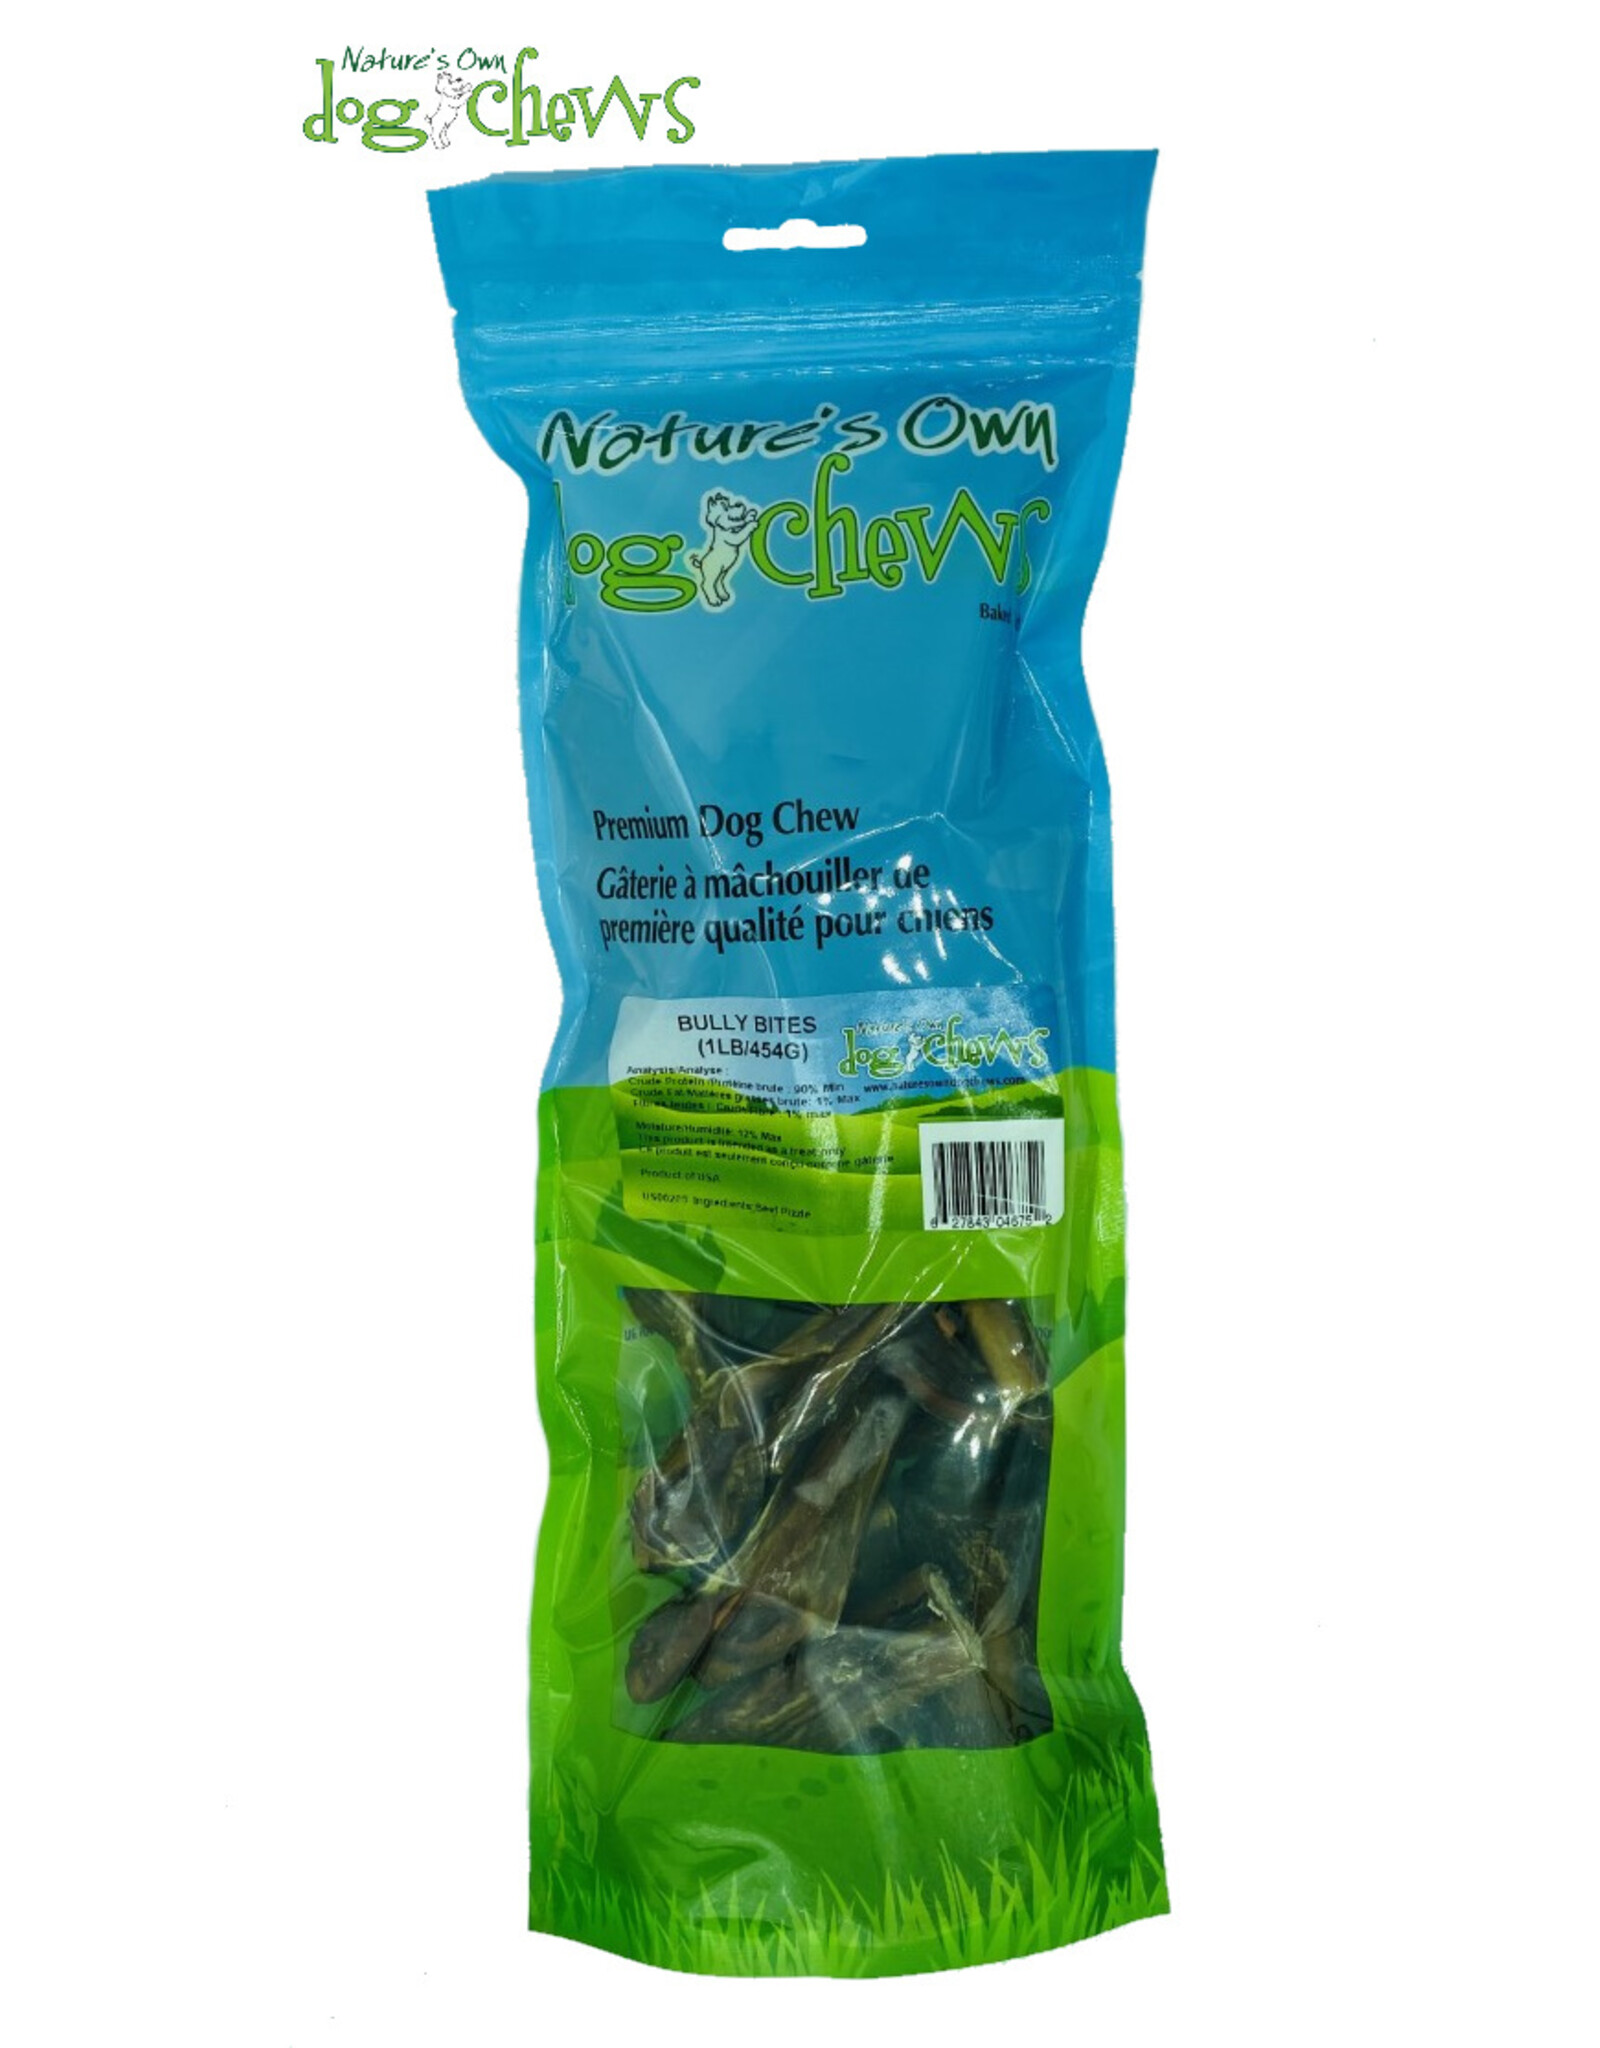 natures own dog chews Nature's Own Bully bites 1lb